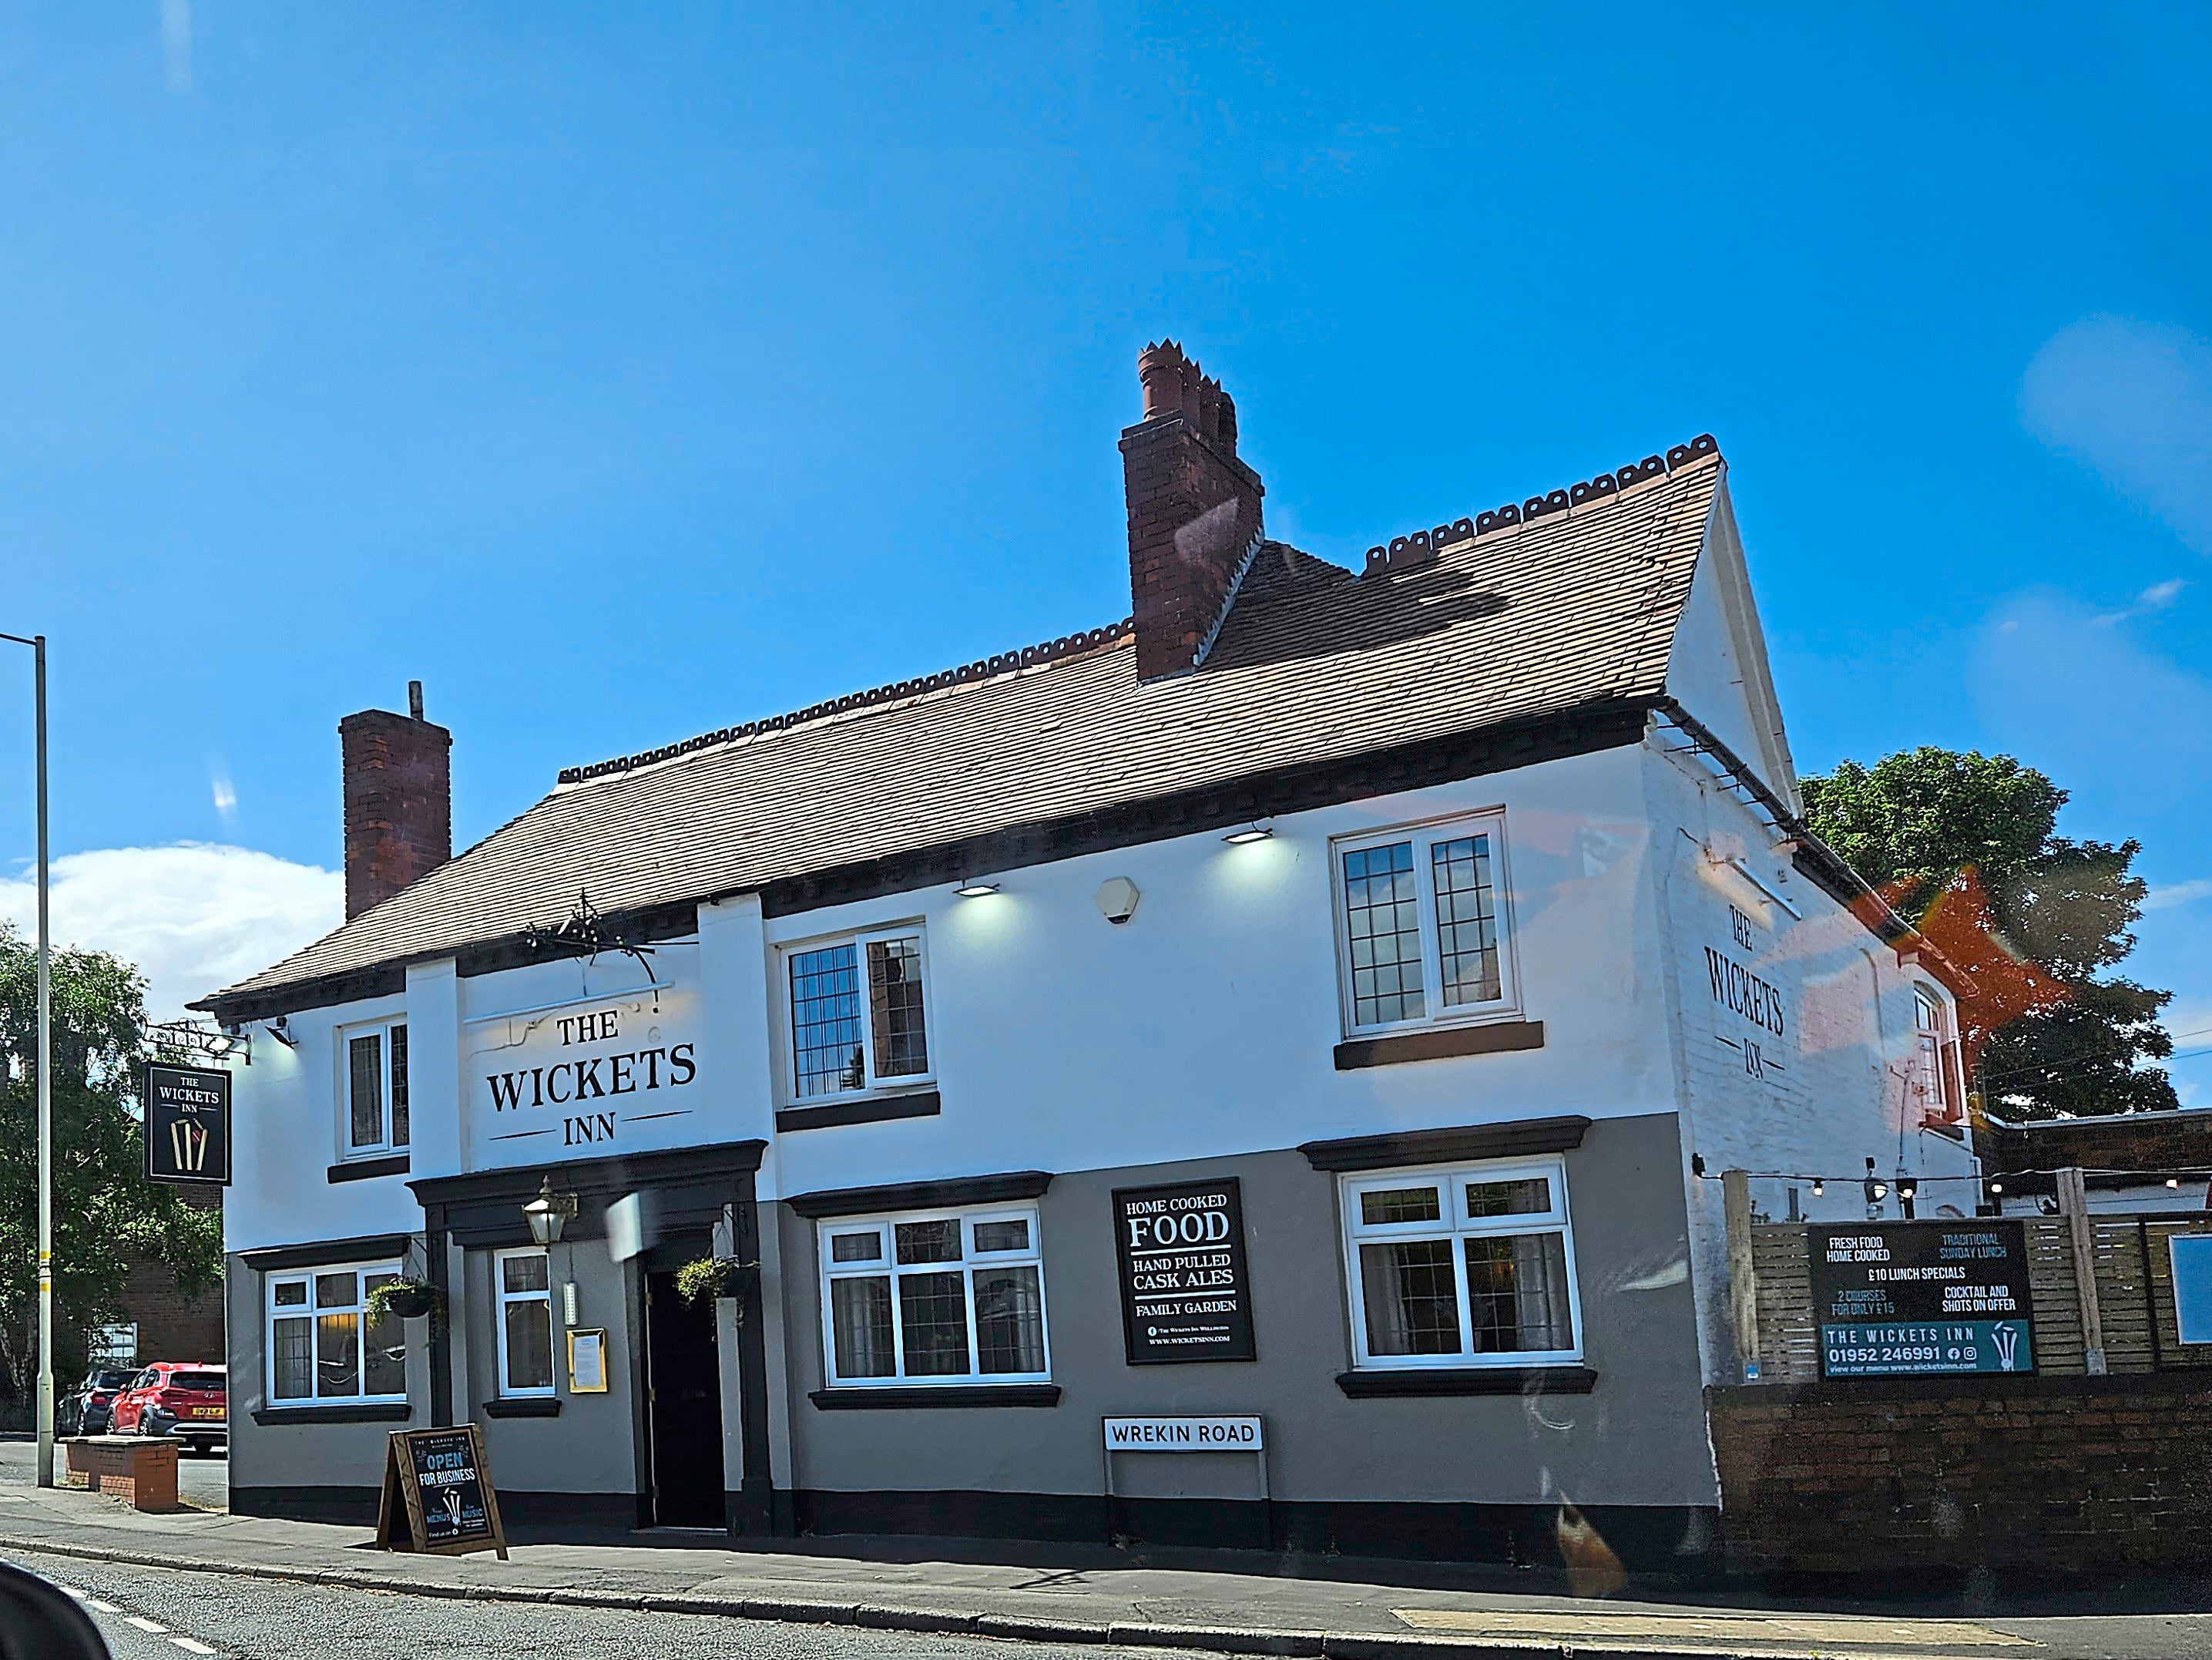 Review: I visited a traditional Shropshire pub and was transported back to the 1980s